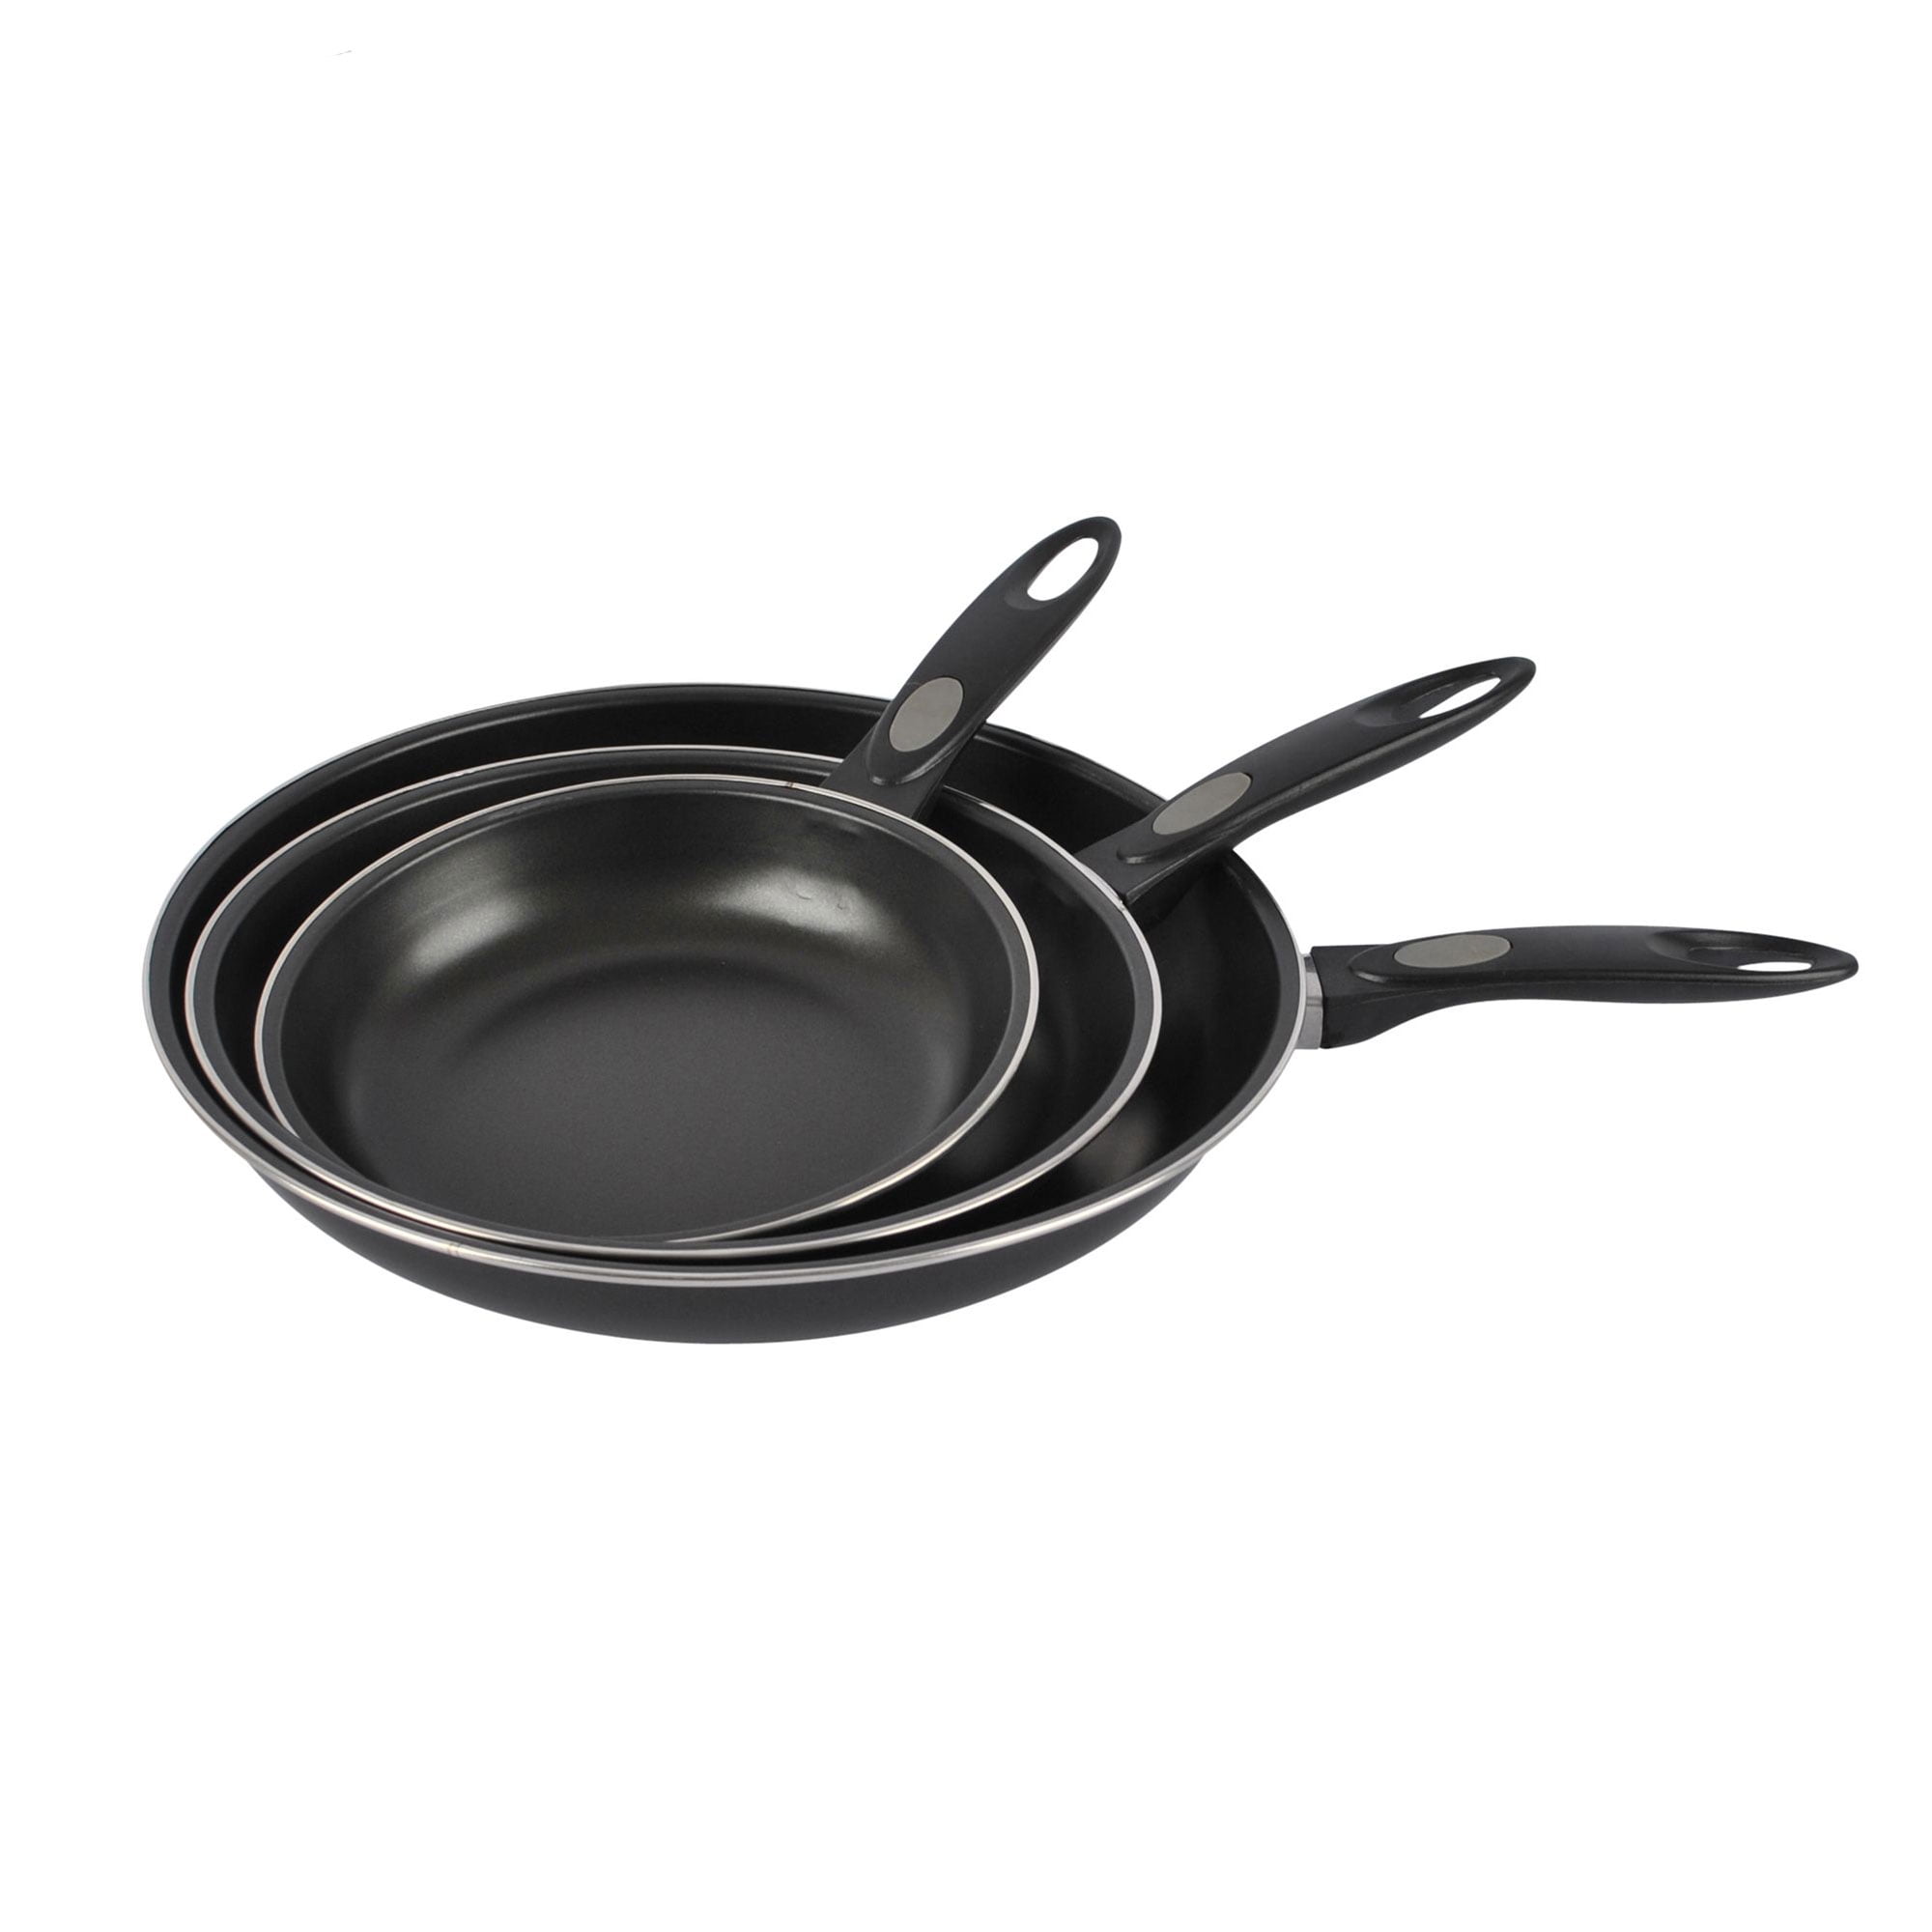 2-Pc Home Kitchen Cookware Tools Nonstick Frying Skillet Fry Pans Set Black 